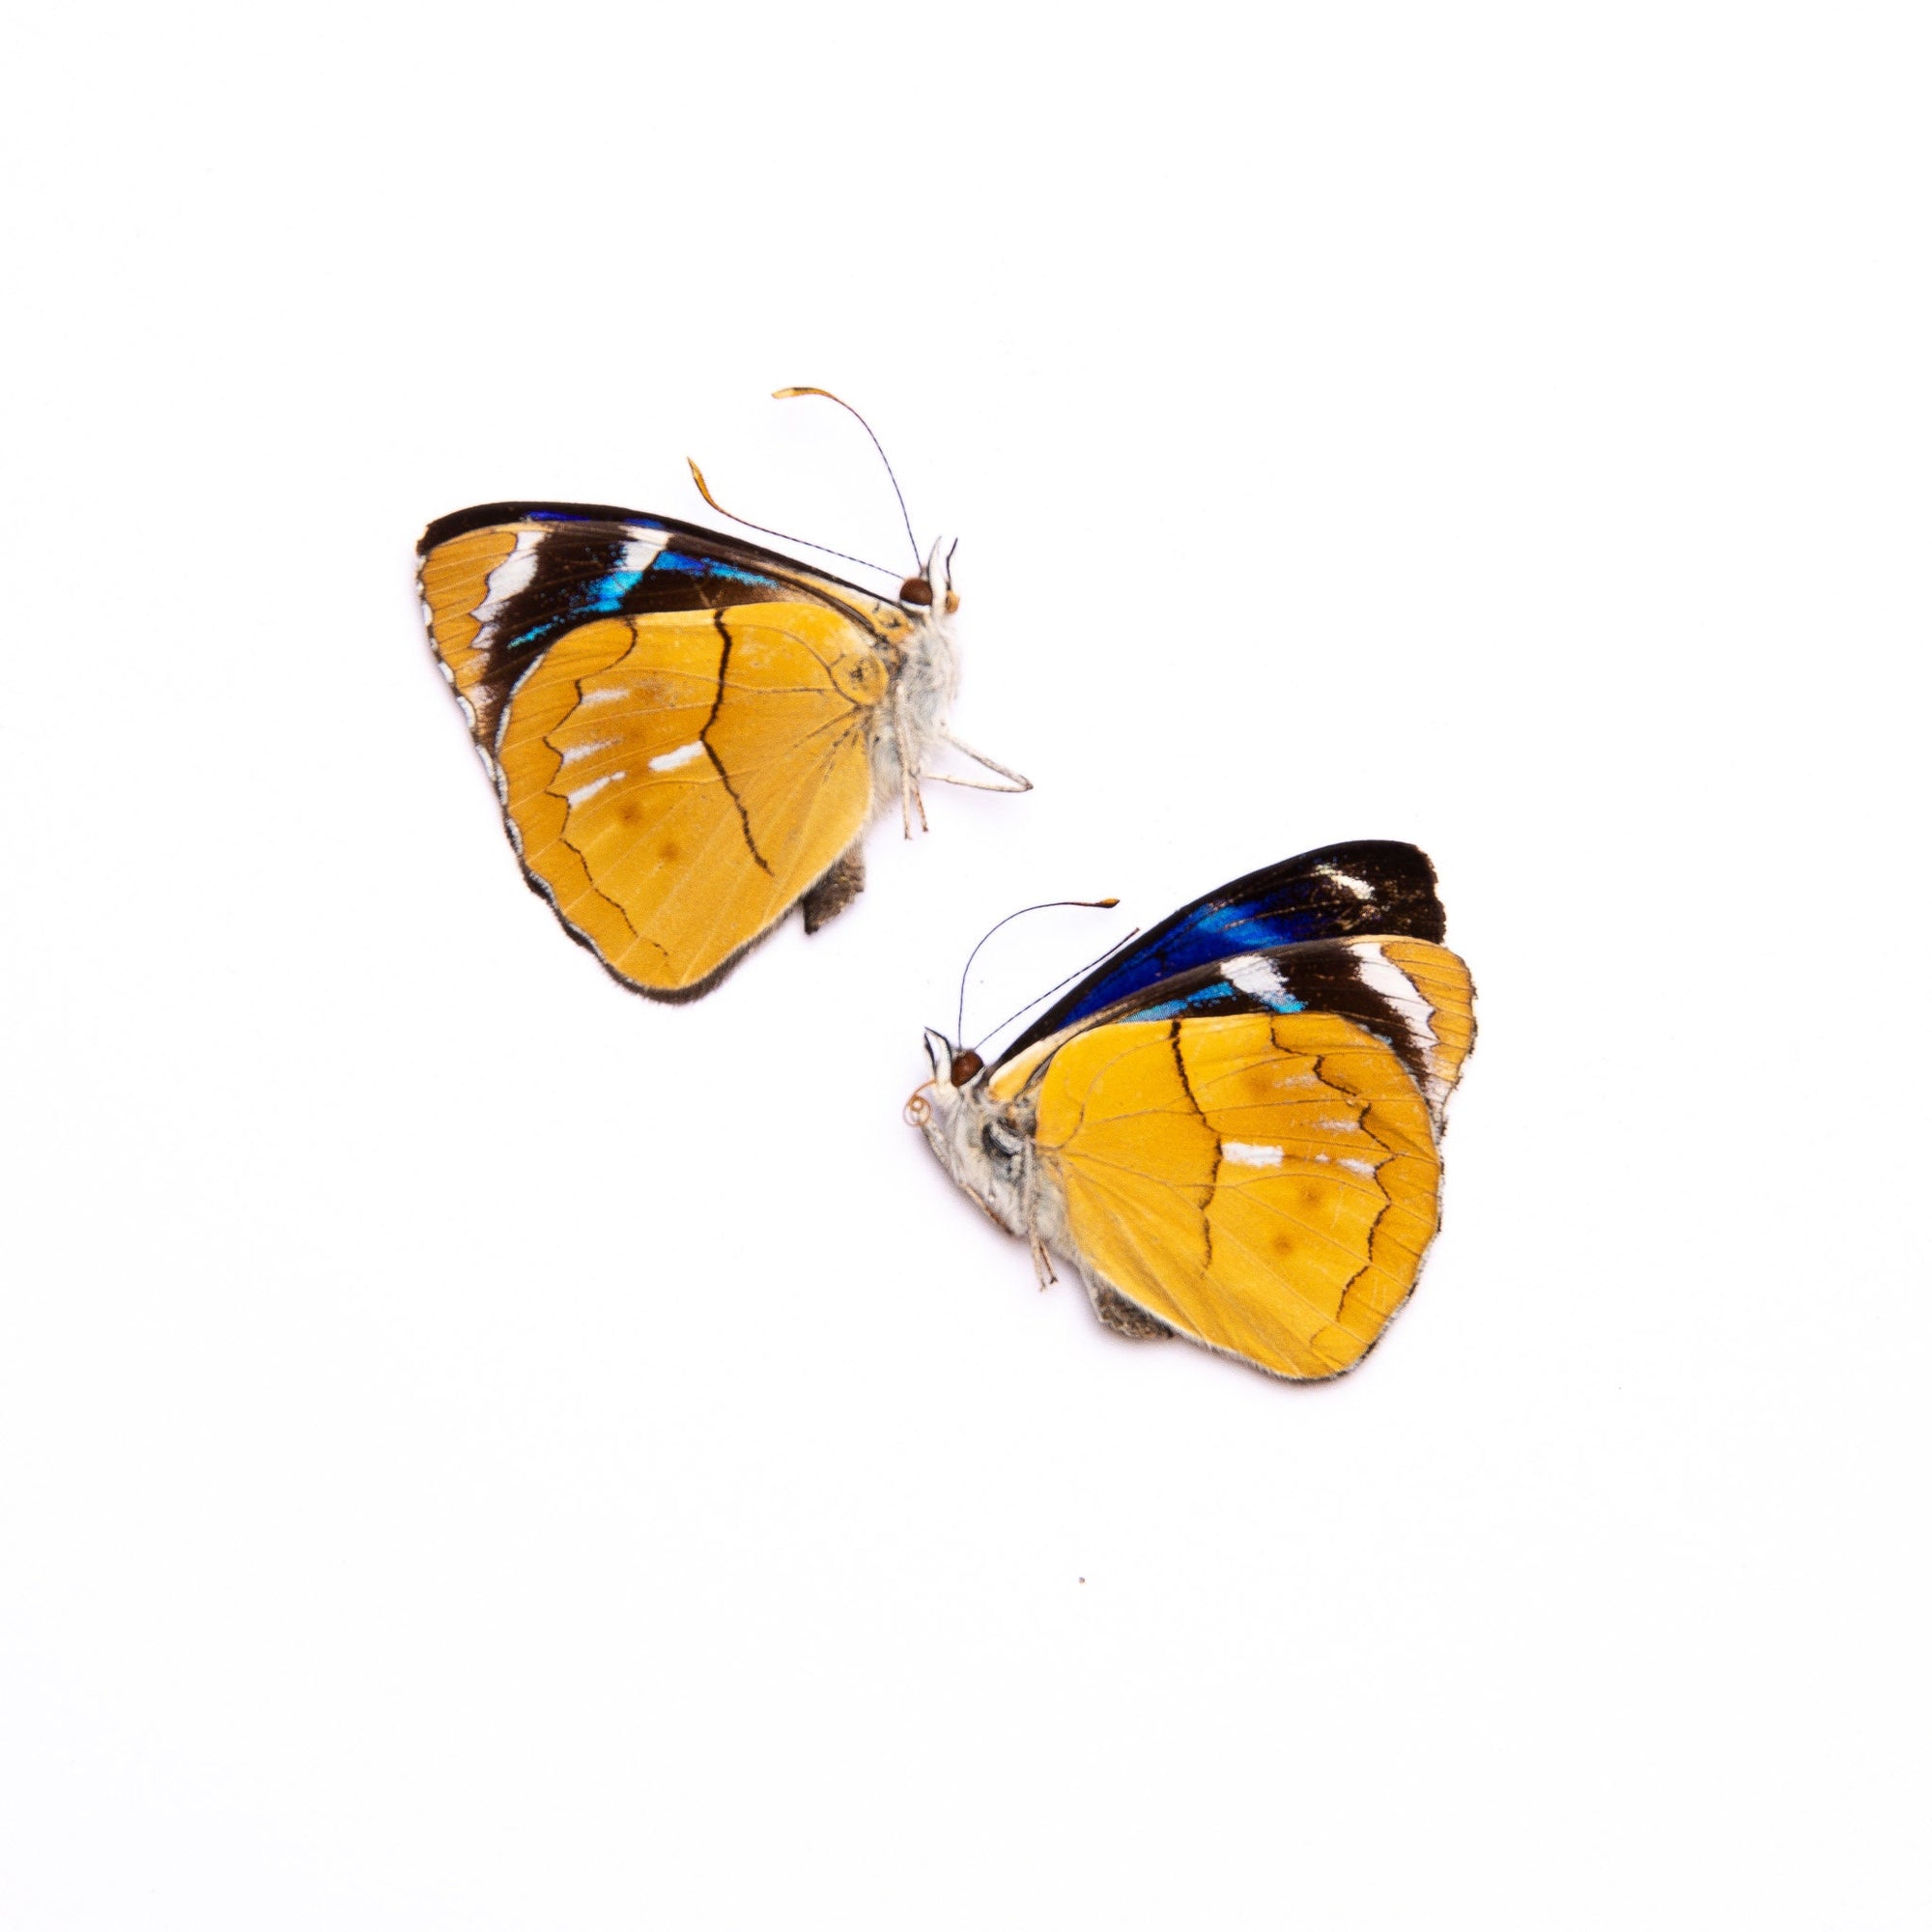 TWO (2) Perisama philinus saussurei | A1 Real Dry-Preserved Butterflies | Unmounted Entomology Taxidermy Specimens